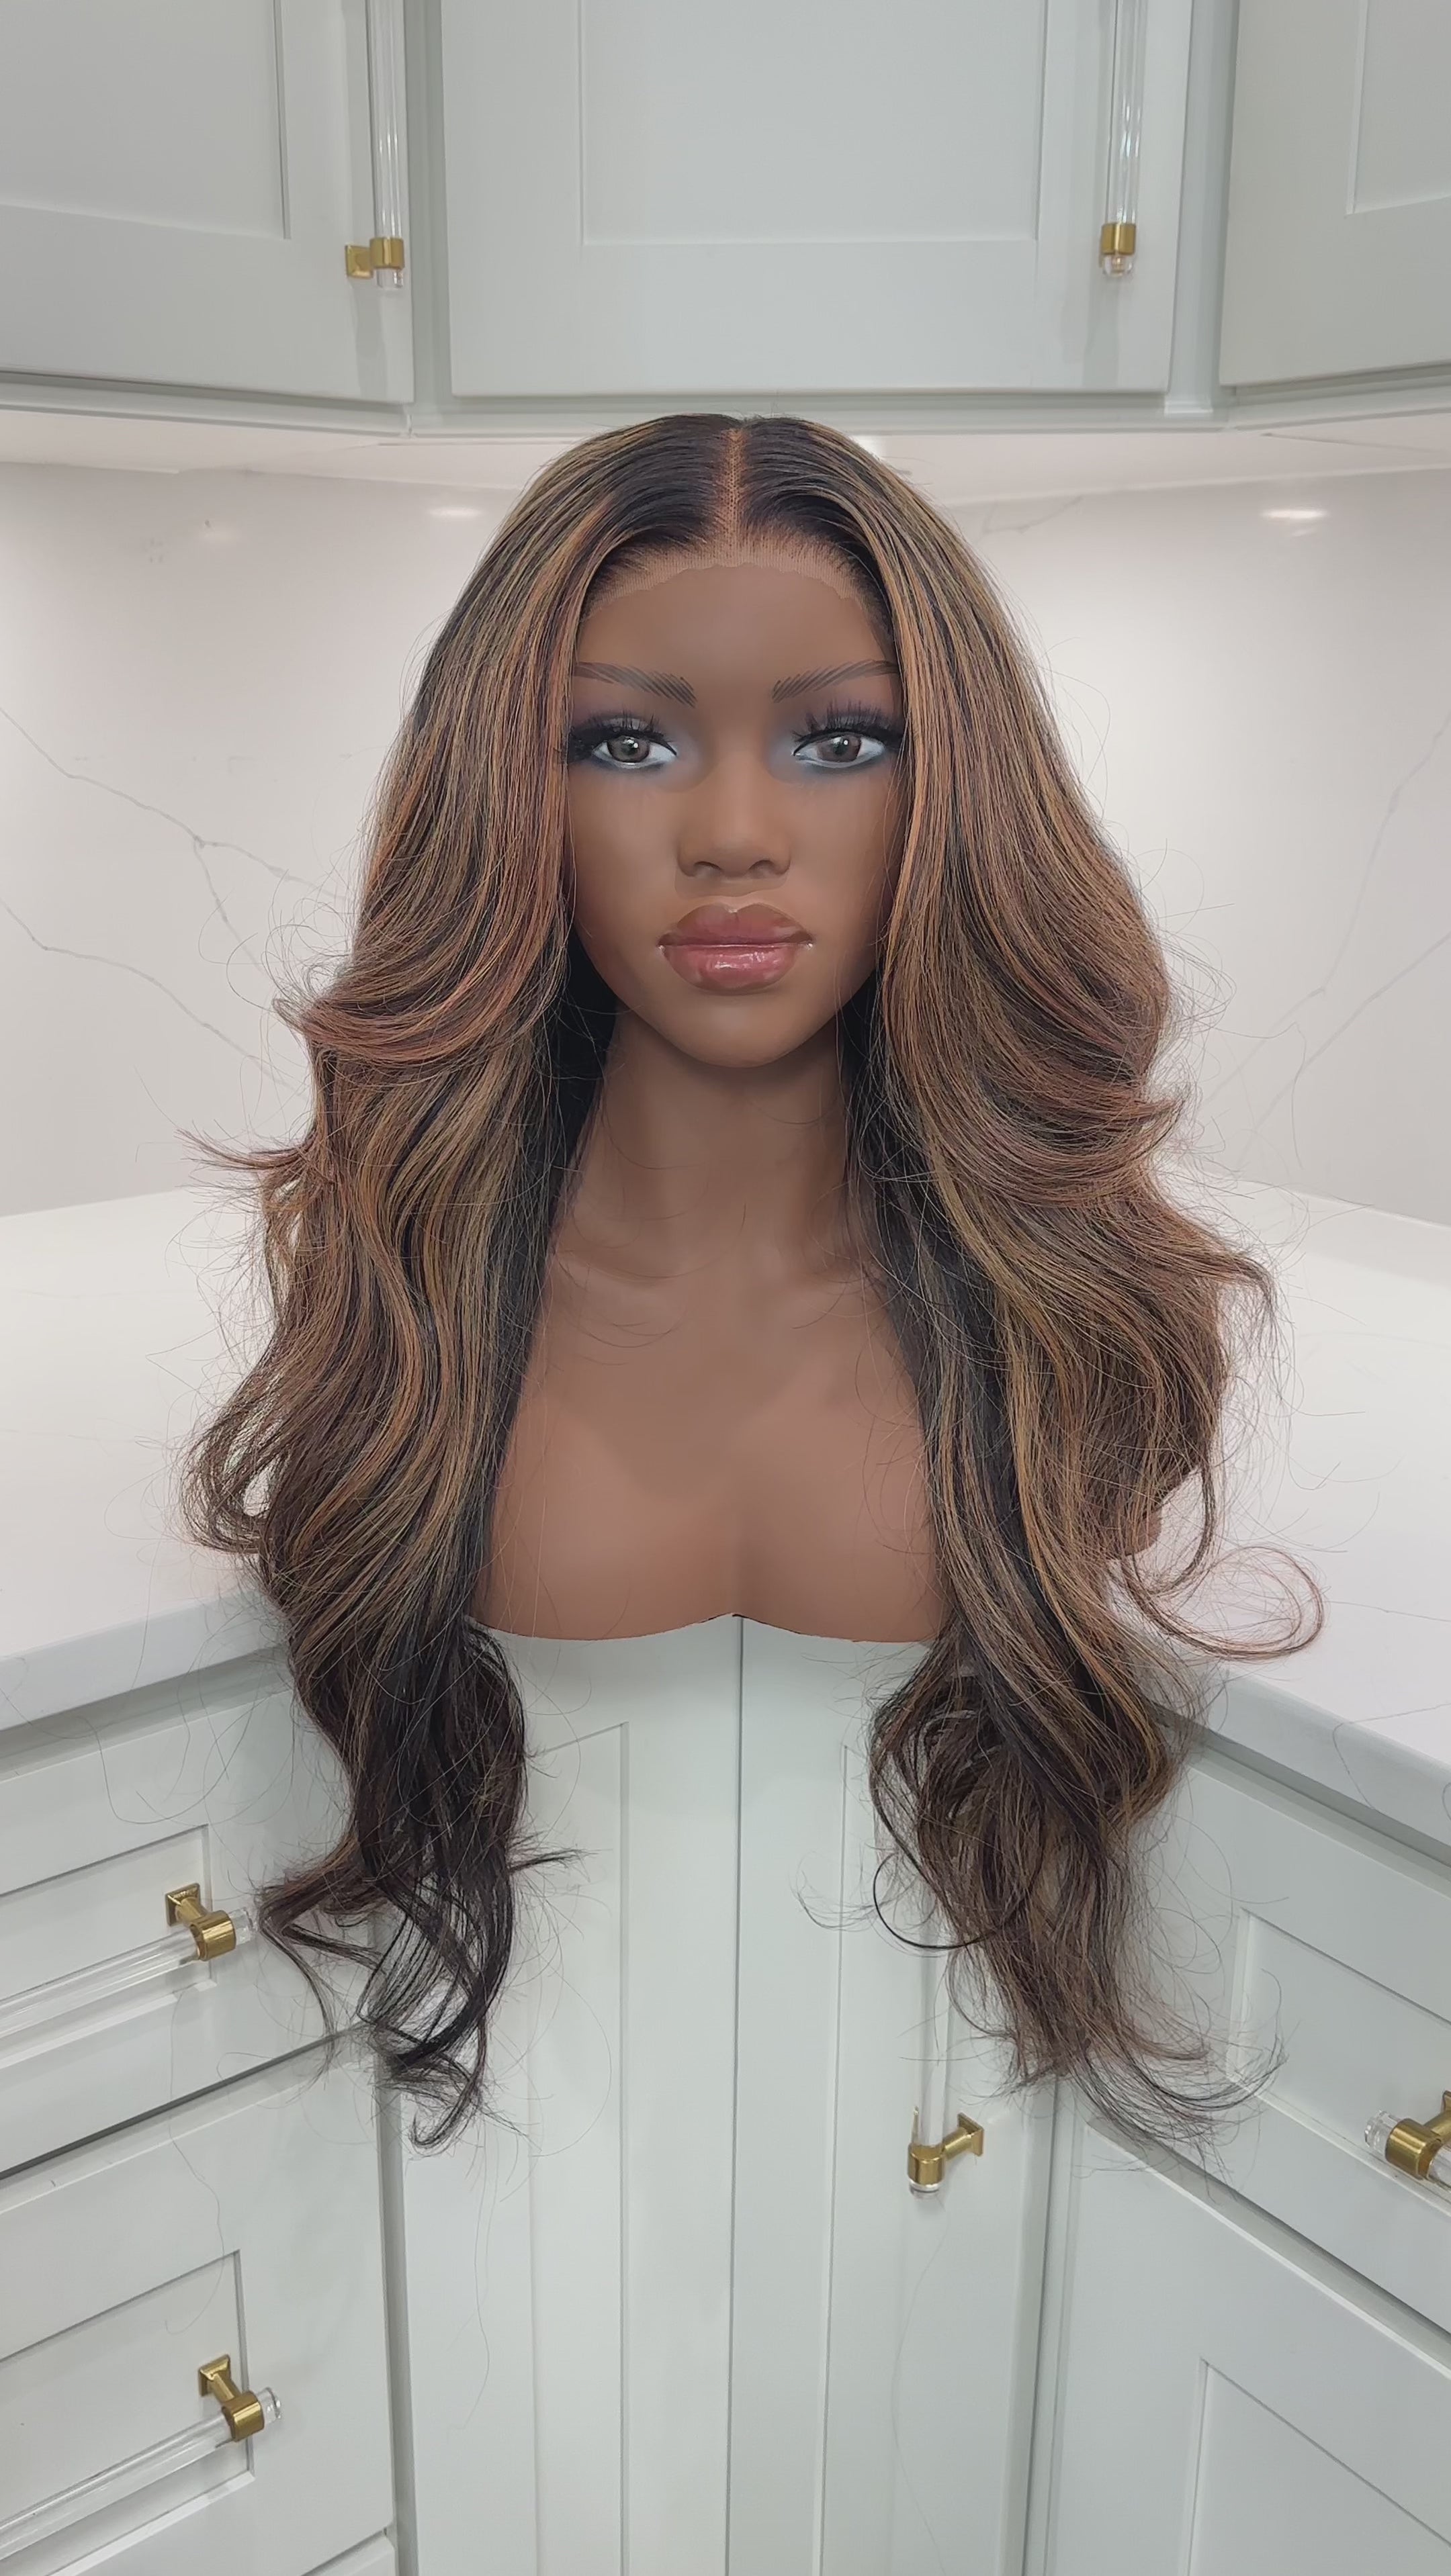 S.ADAMS COLLECTION - LUXURY VIRGIN HAIR EXTENSIONS AND WIGS